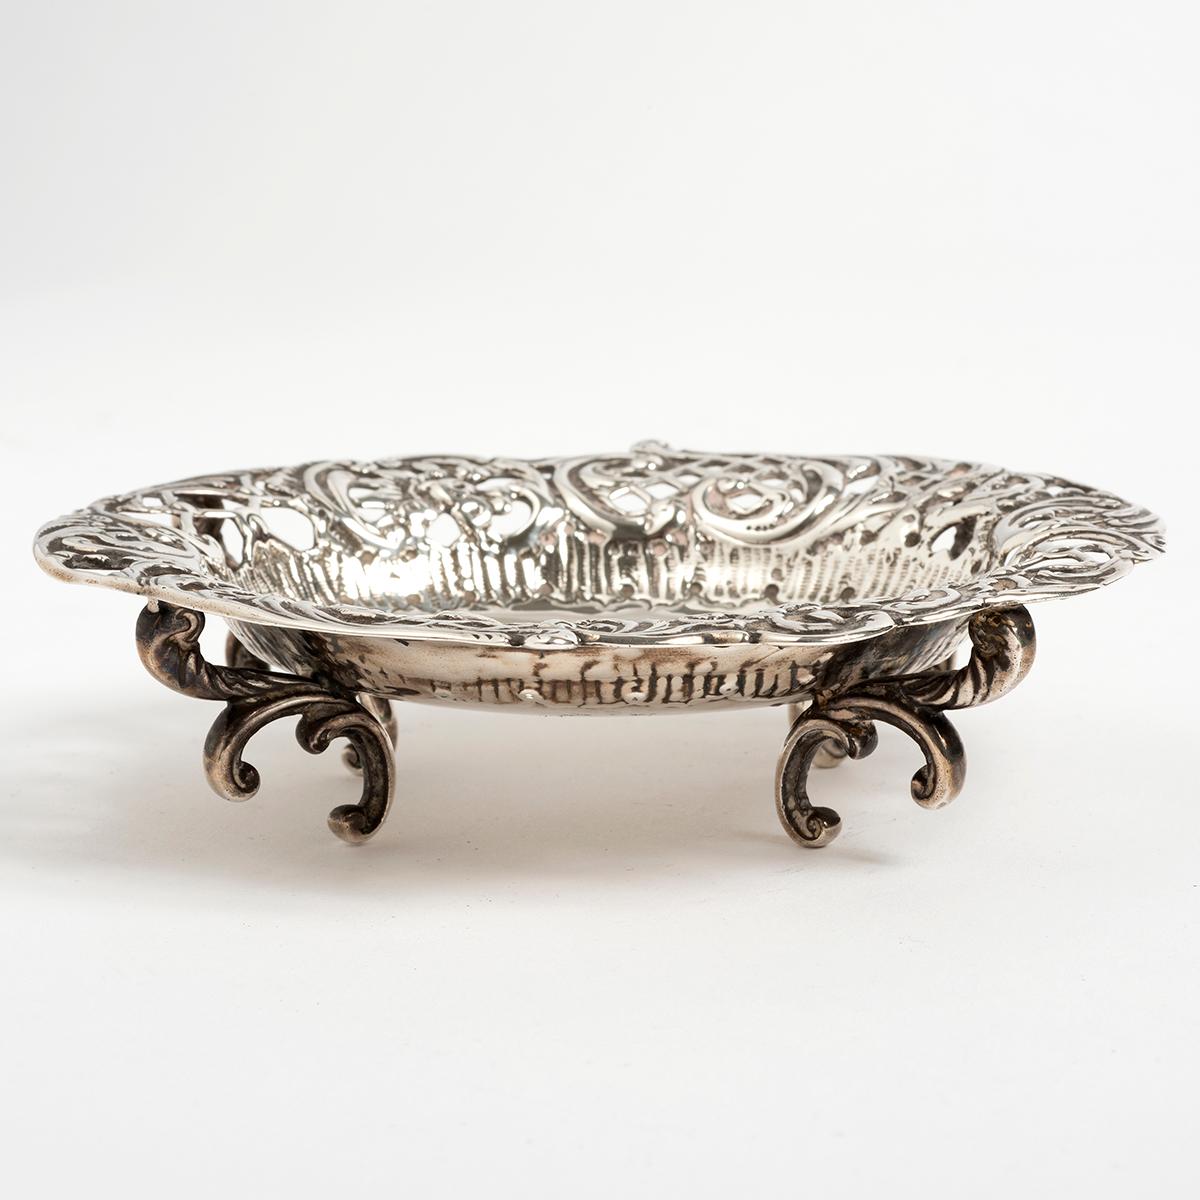 This sterling silver pie crust salver tray is dated 1757 and is in excellent condition. The tray is Hallmarked London and measures 160mm x 160mm.  